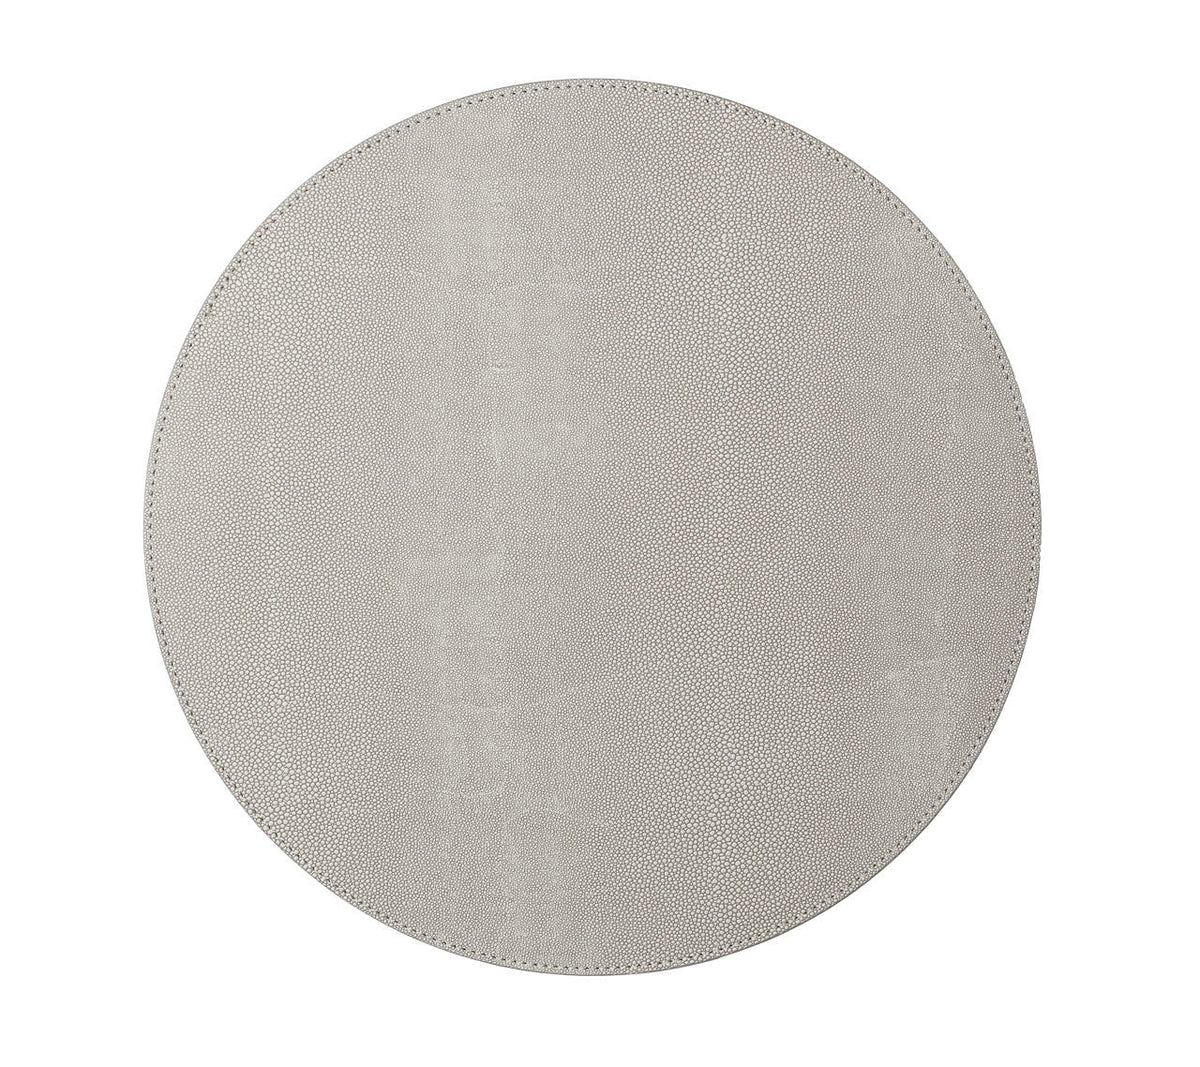 Shagreen Placemat in Elephant, Set of 4